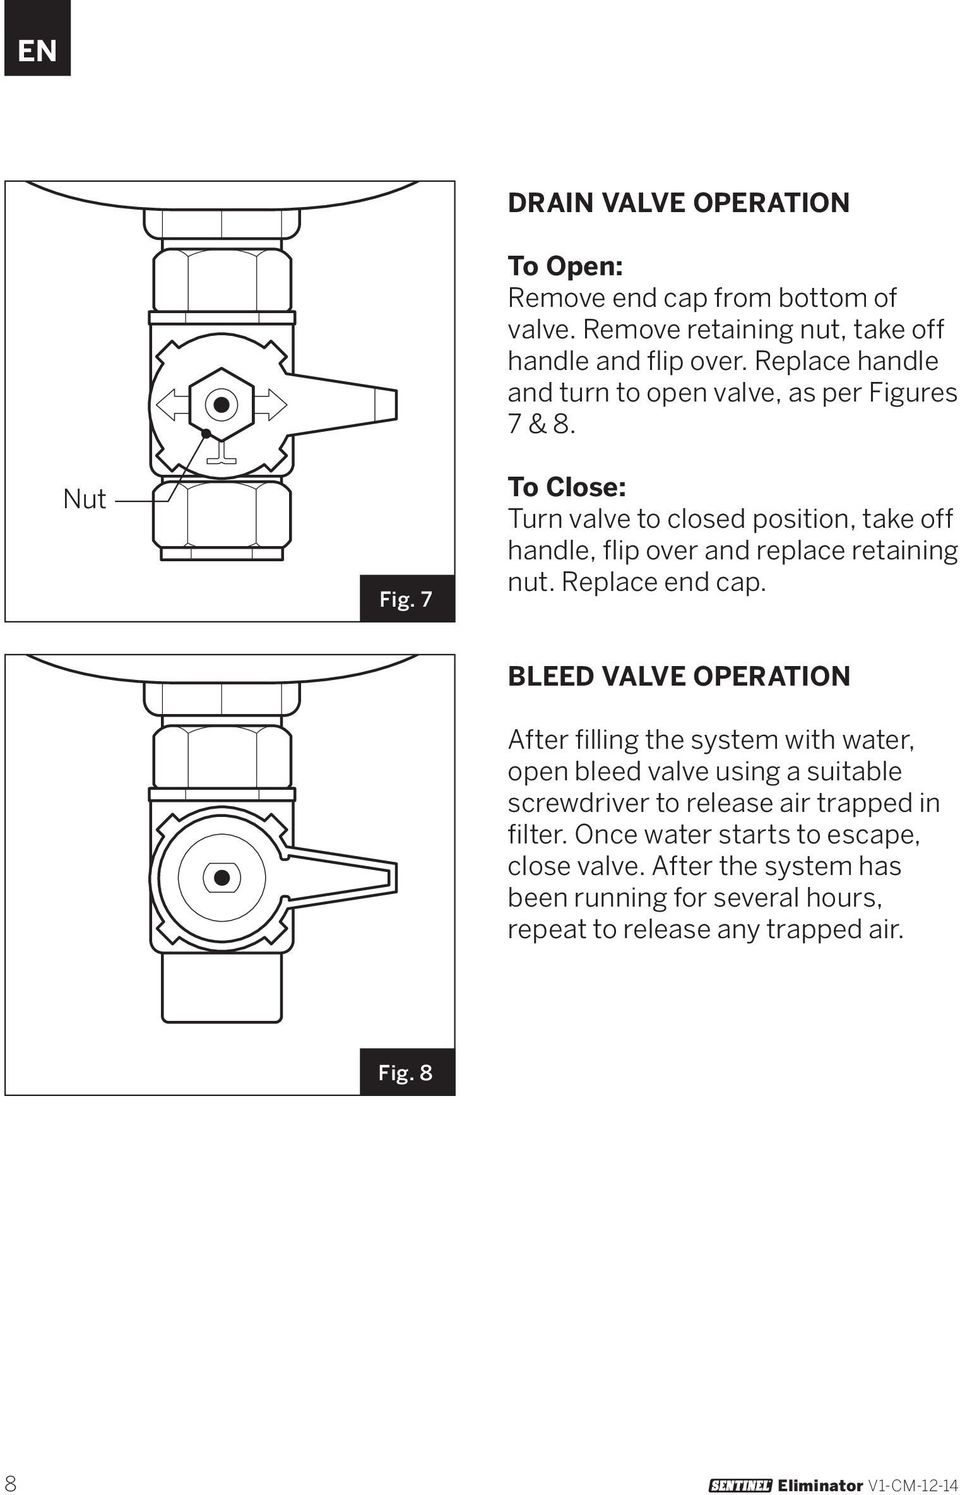 To Close: Turn valve to closed position, take off handle, flip over and replace retaining nut. Replace end cap.